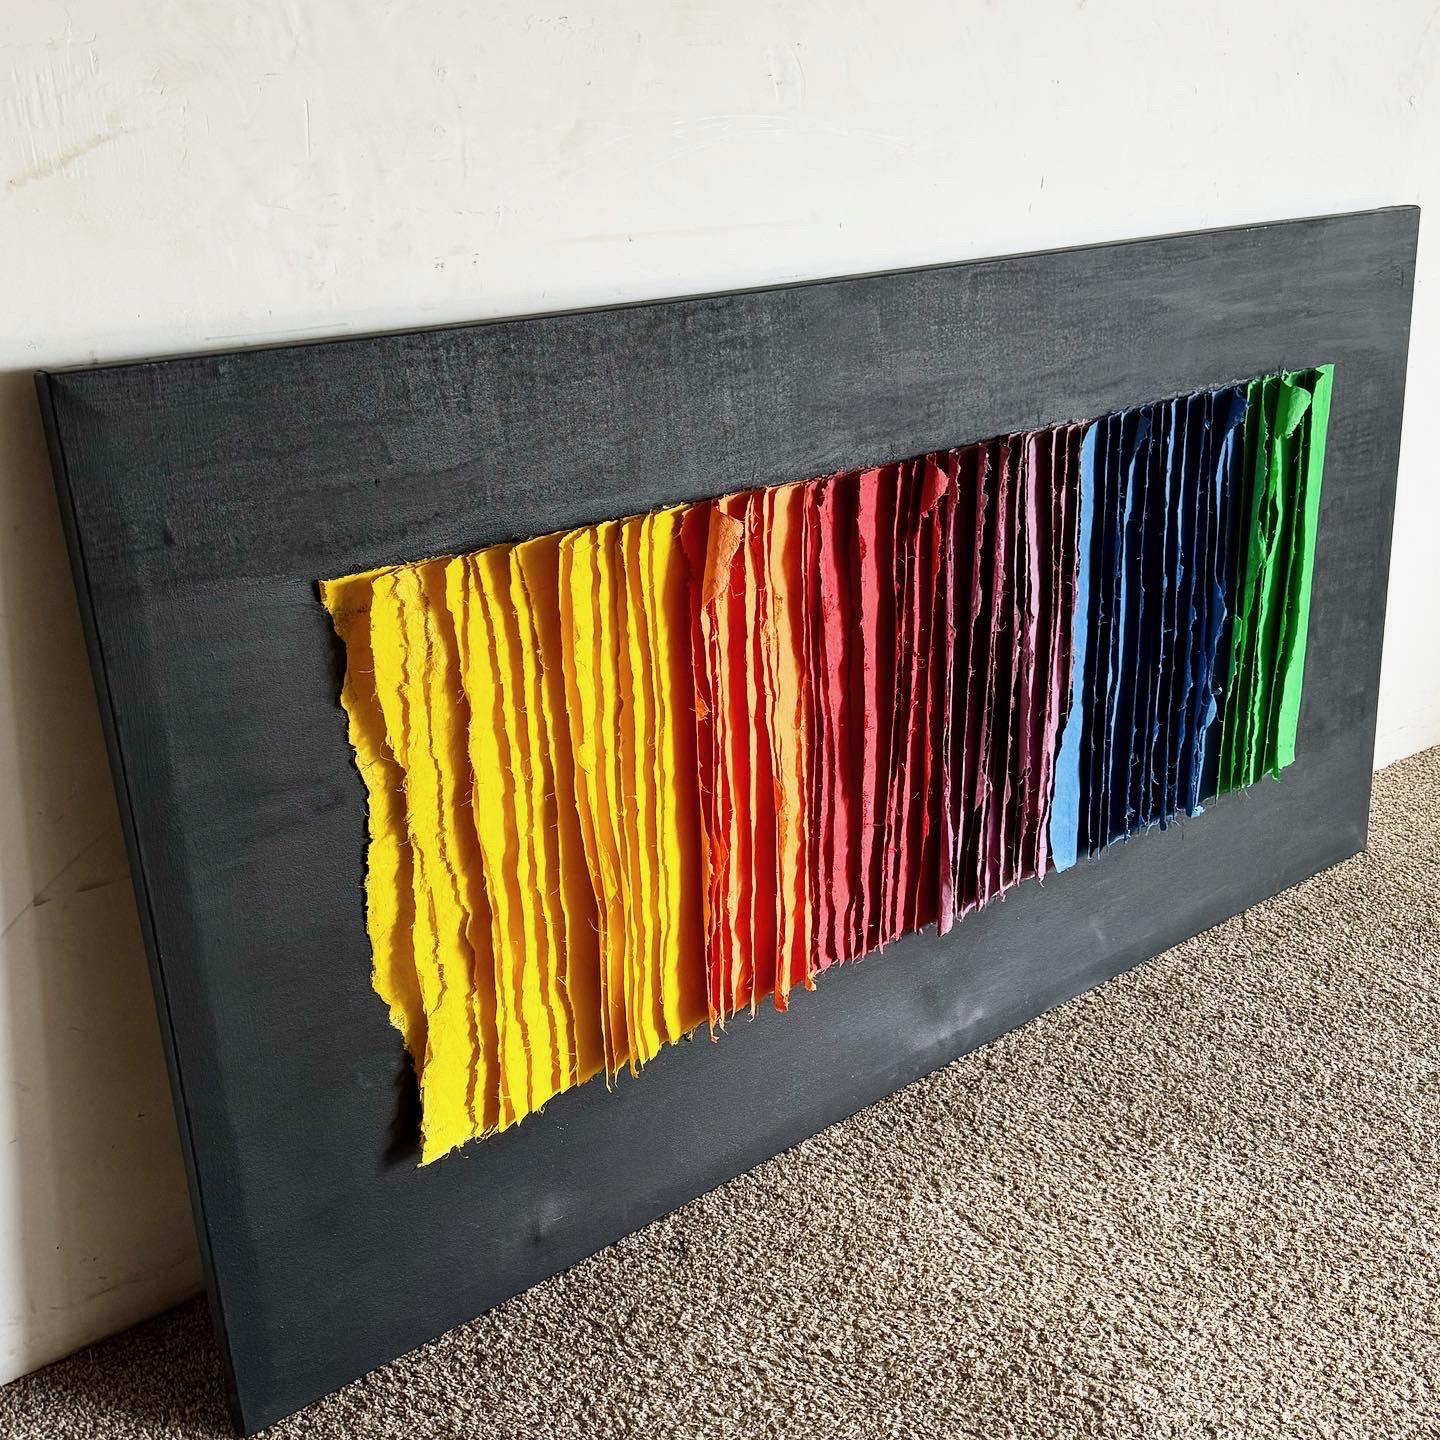 The Postmodern Colored Paper Wall Art on Painted Black Canvas is an expressive and vibrant addition to any modern decor. Its dynamic colored paper composition on a black canvas embodies the eclectic nature of postmodern design, perfect for a